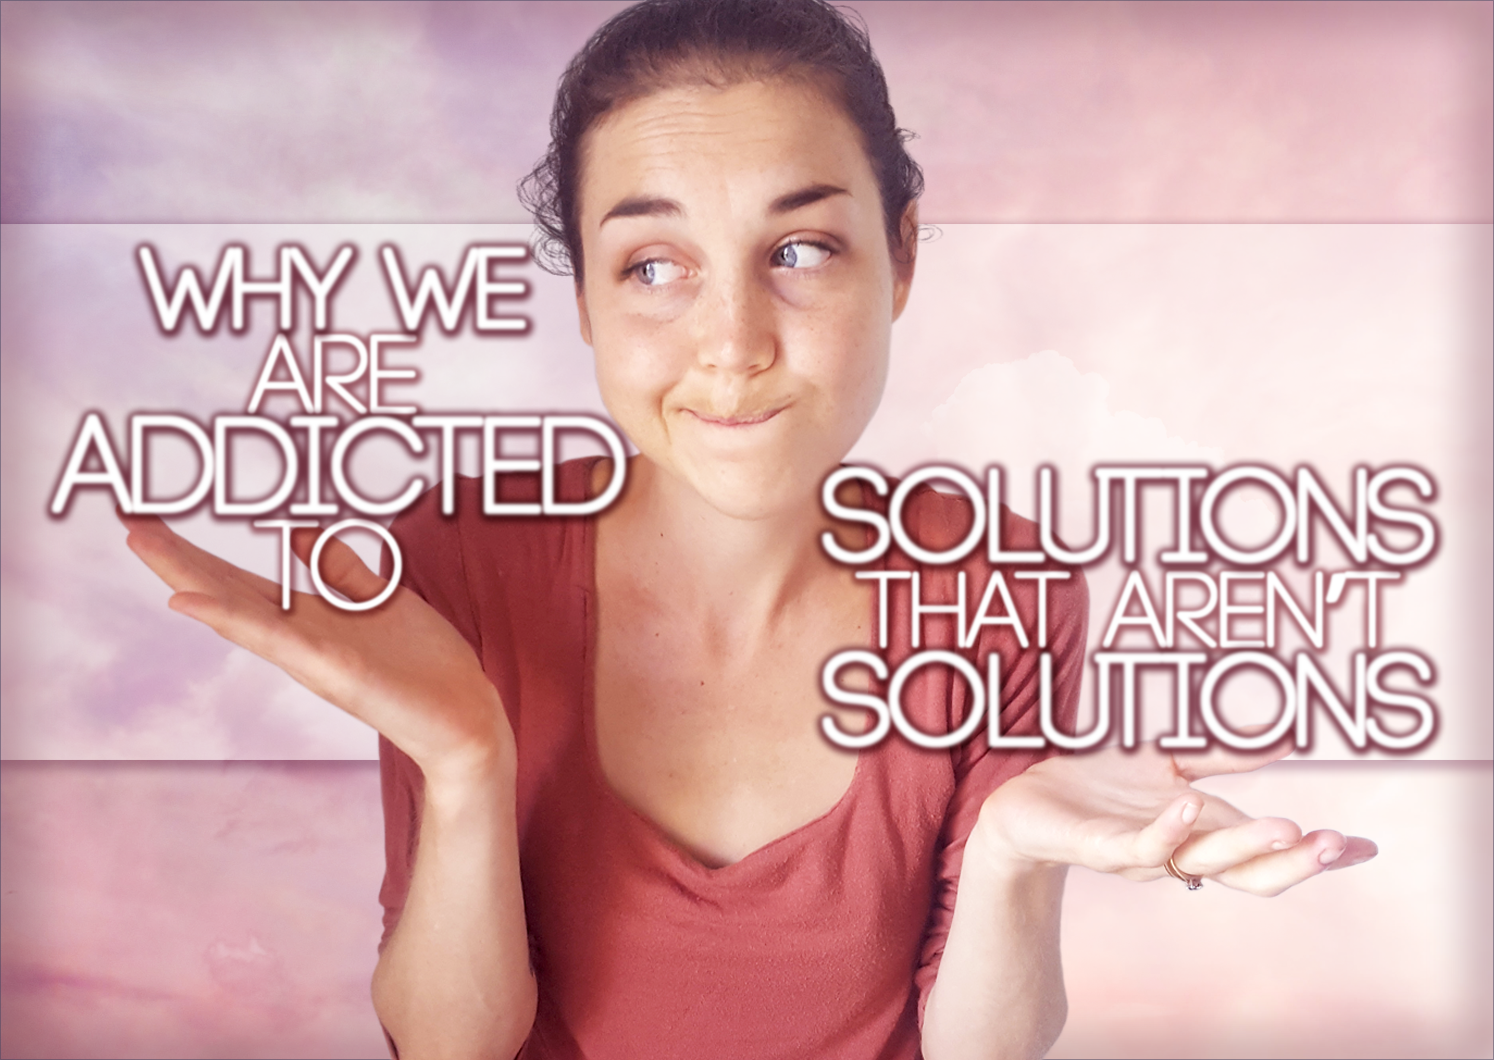 Why We Are Addicted To Solutions That Aren’t Solutions